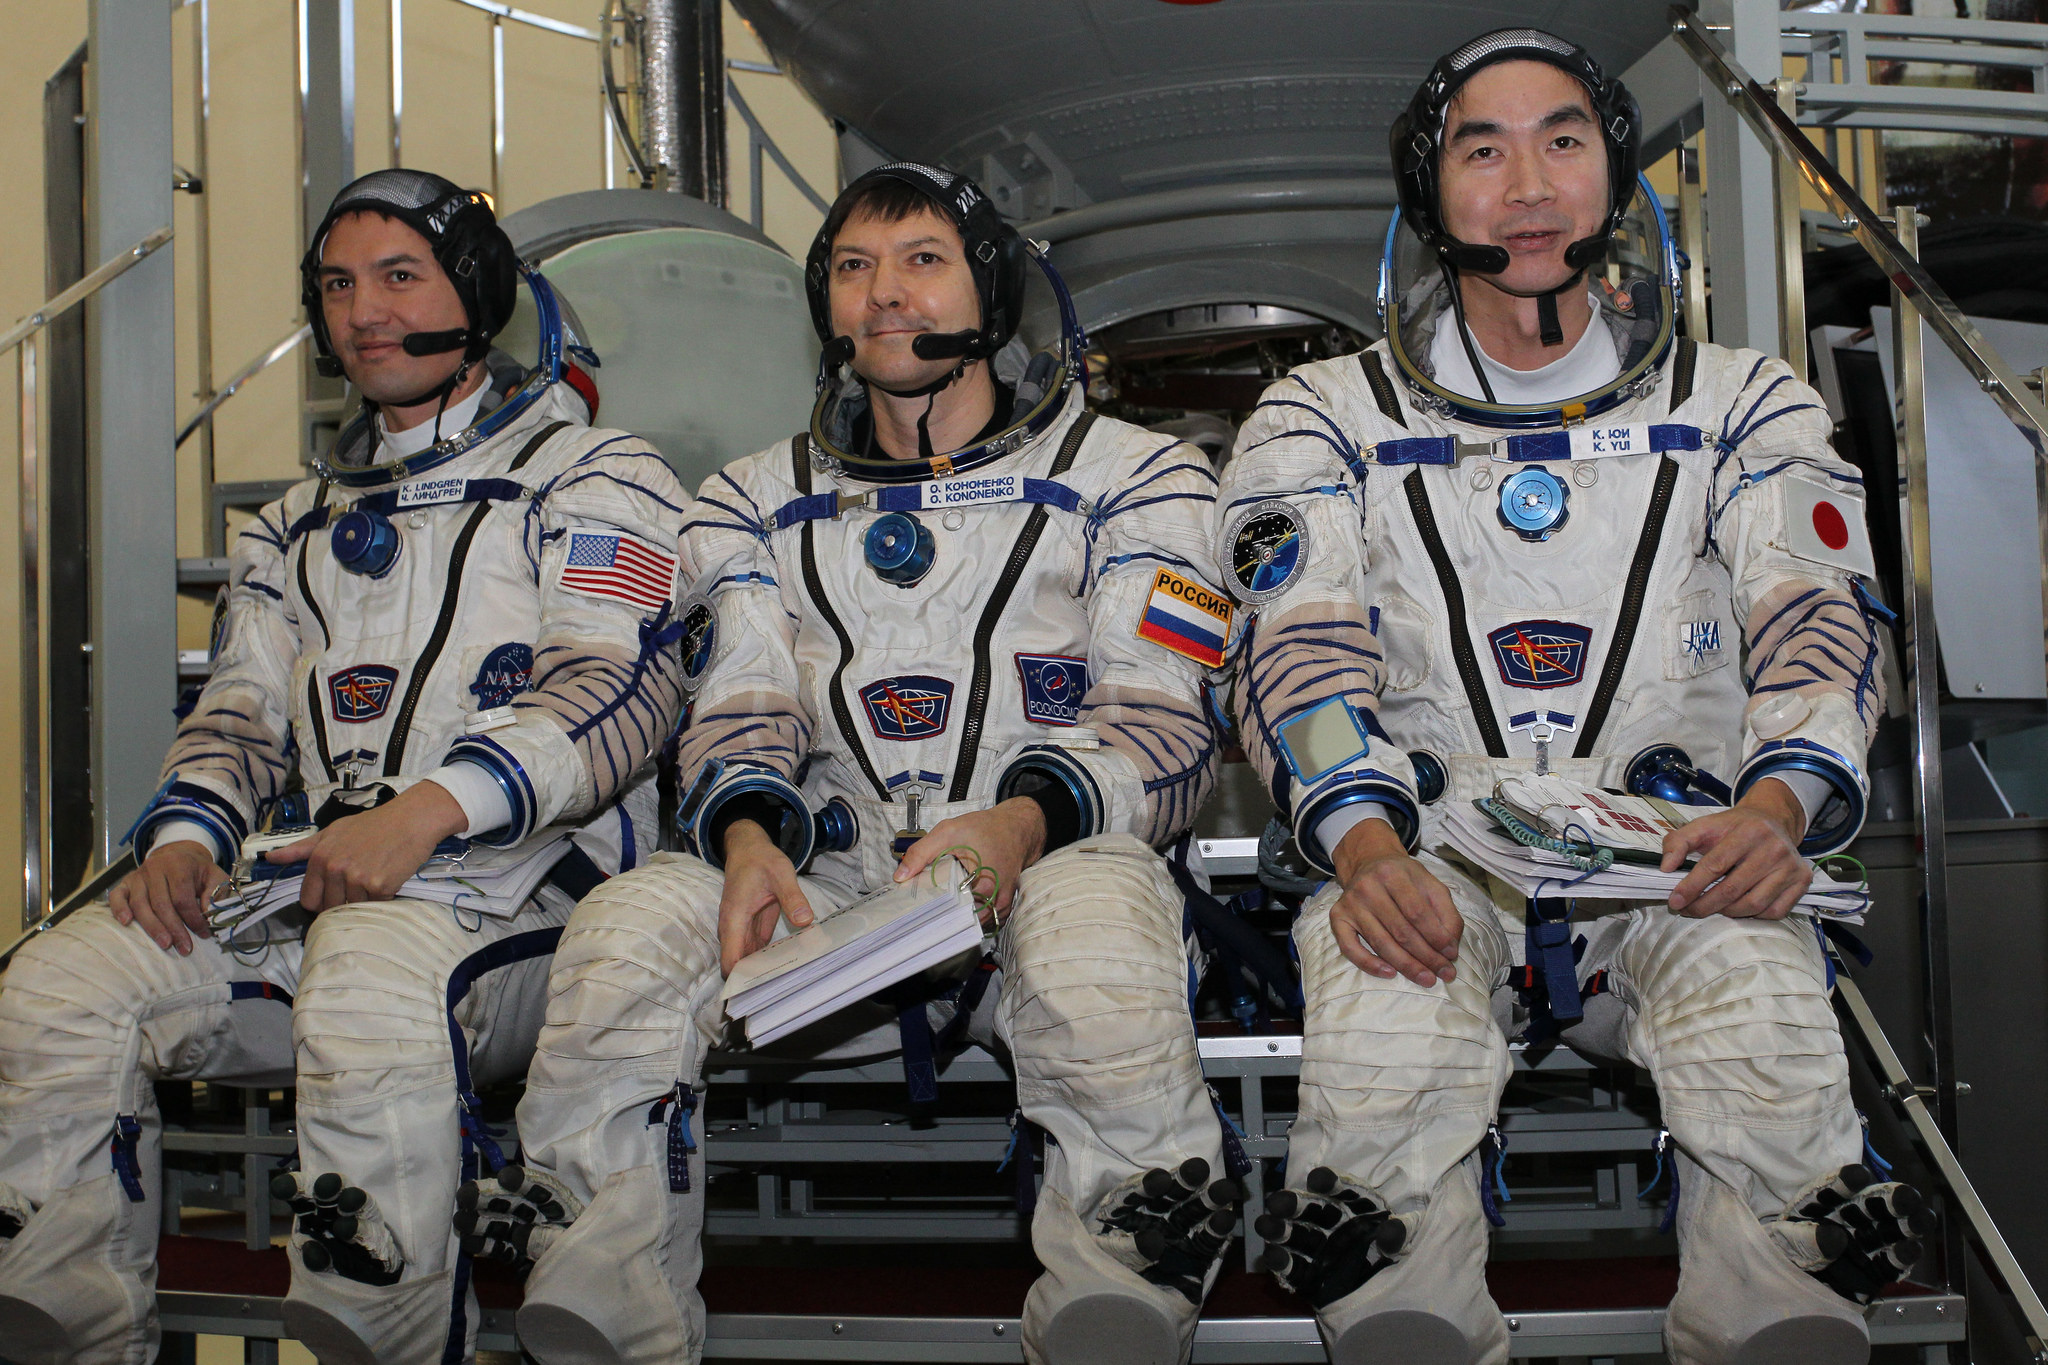 ISS Expedition 44 crew